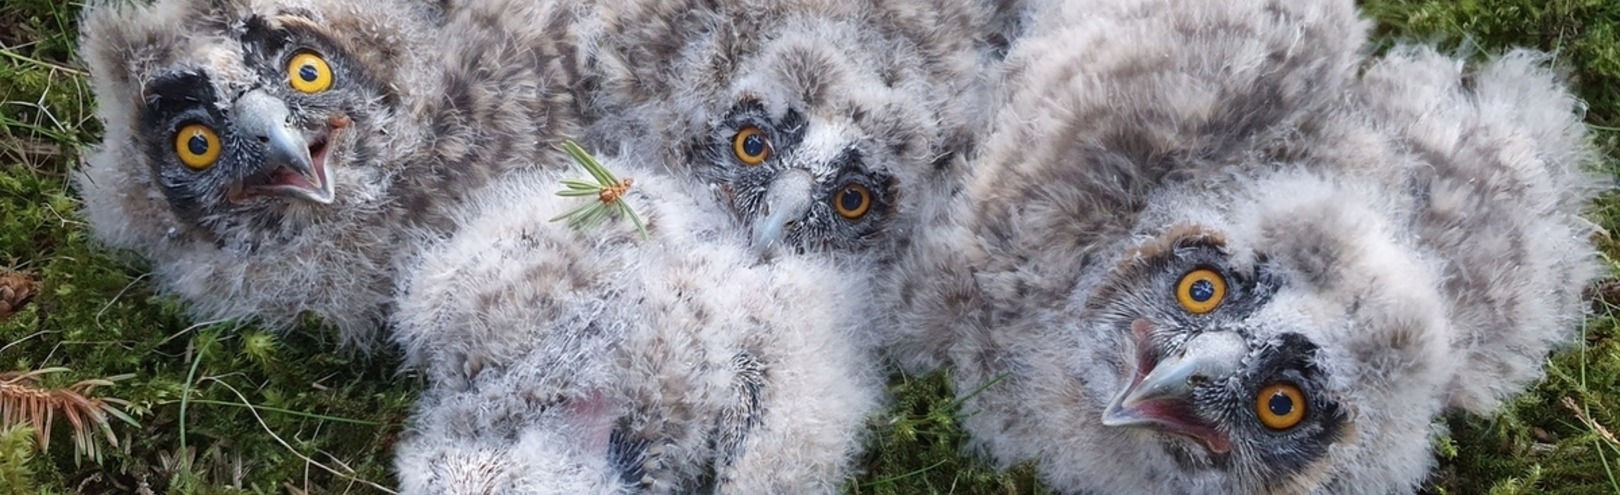 Owl research at the University of Iceland  - Available at University of Iceland